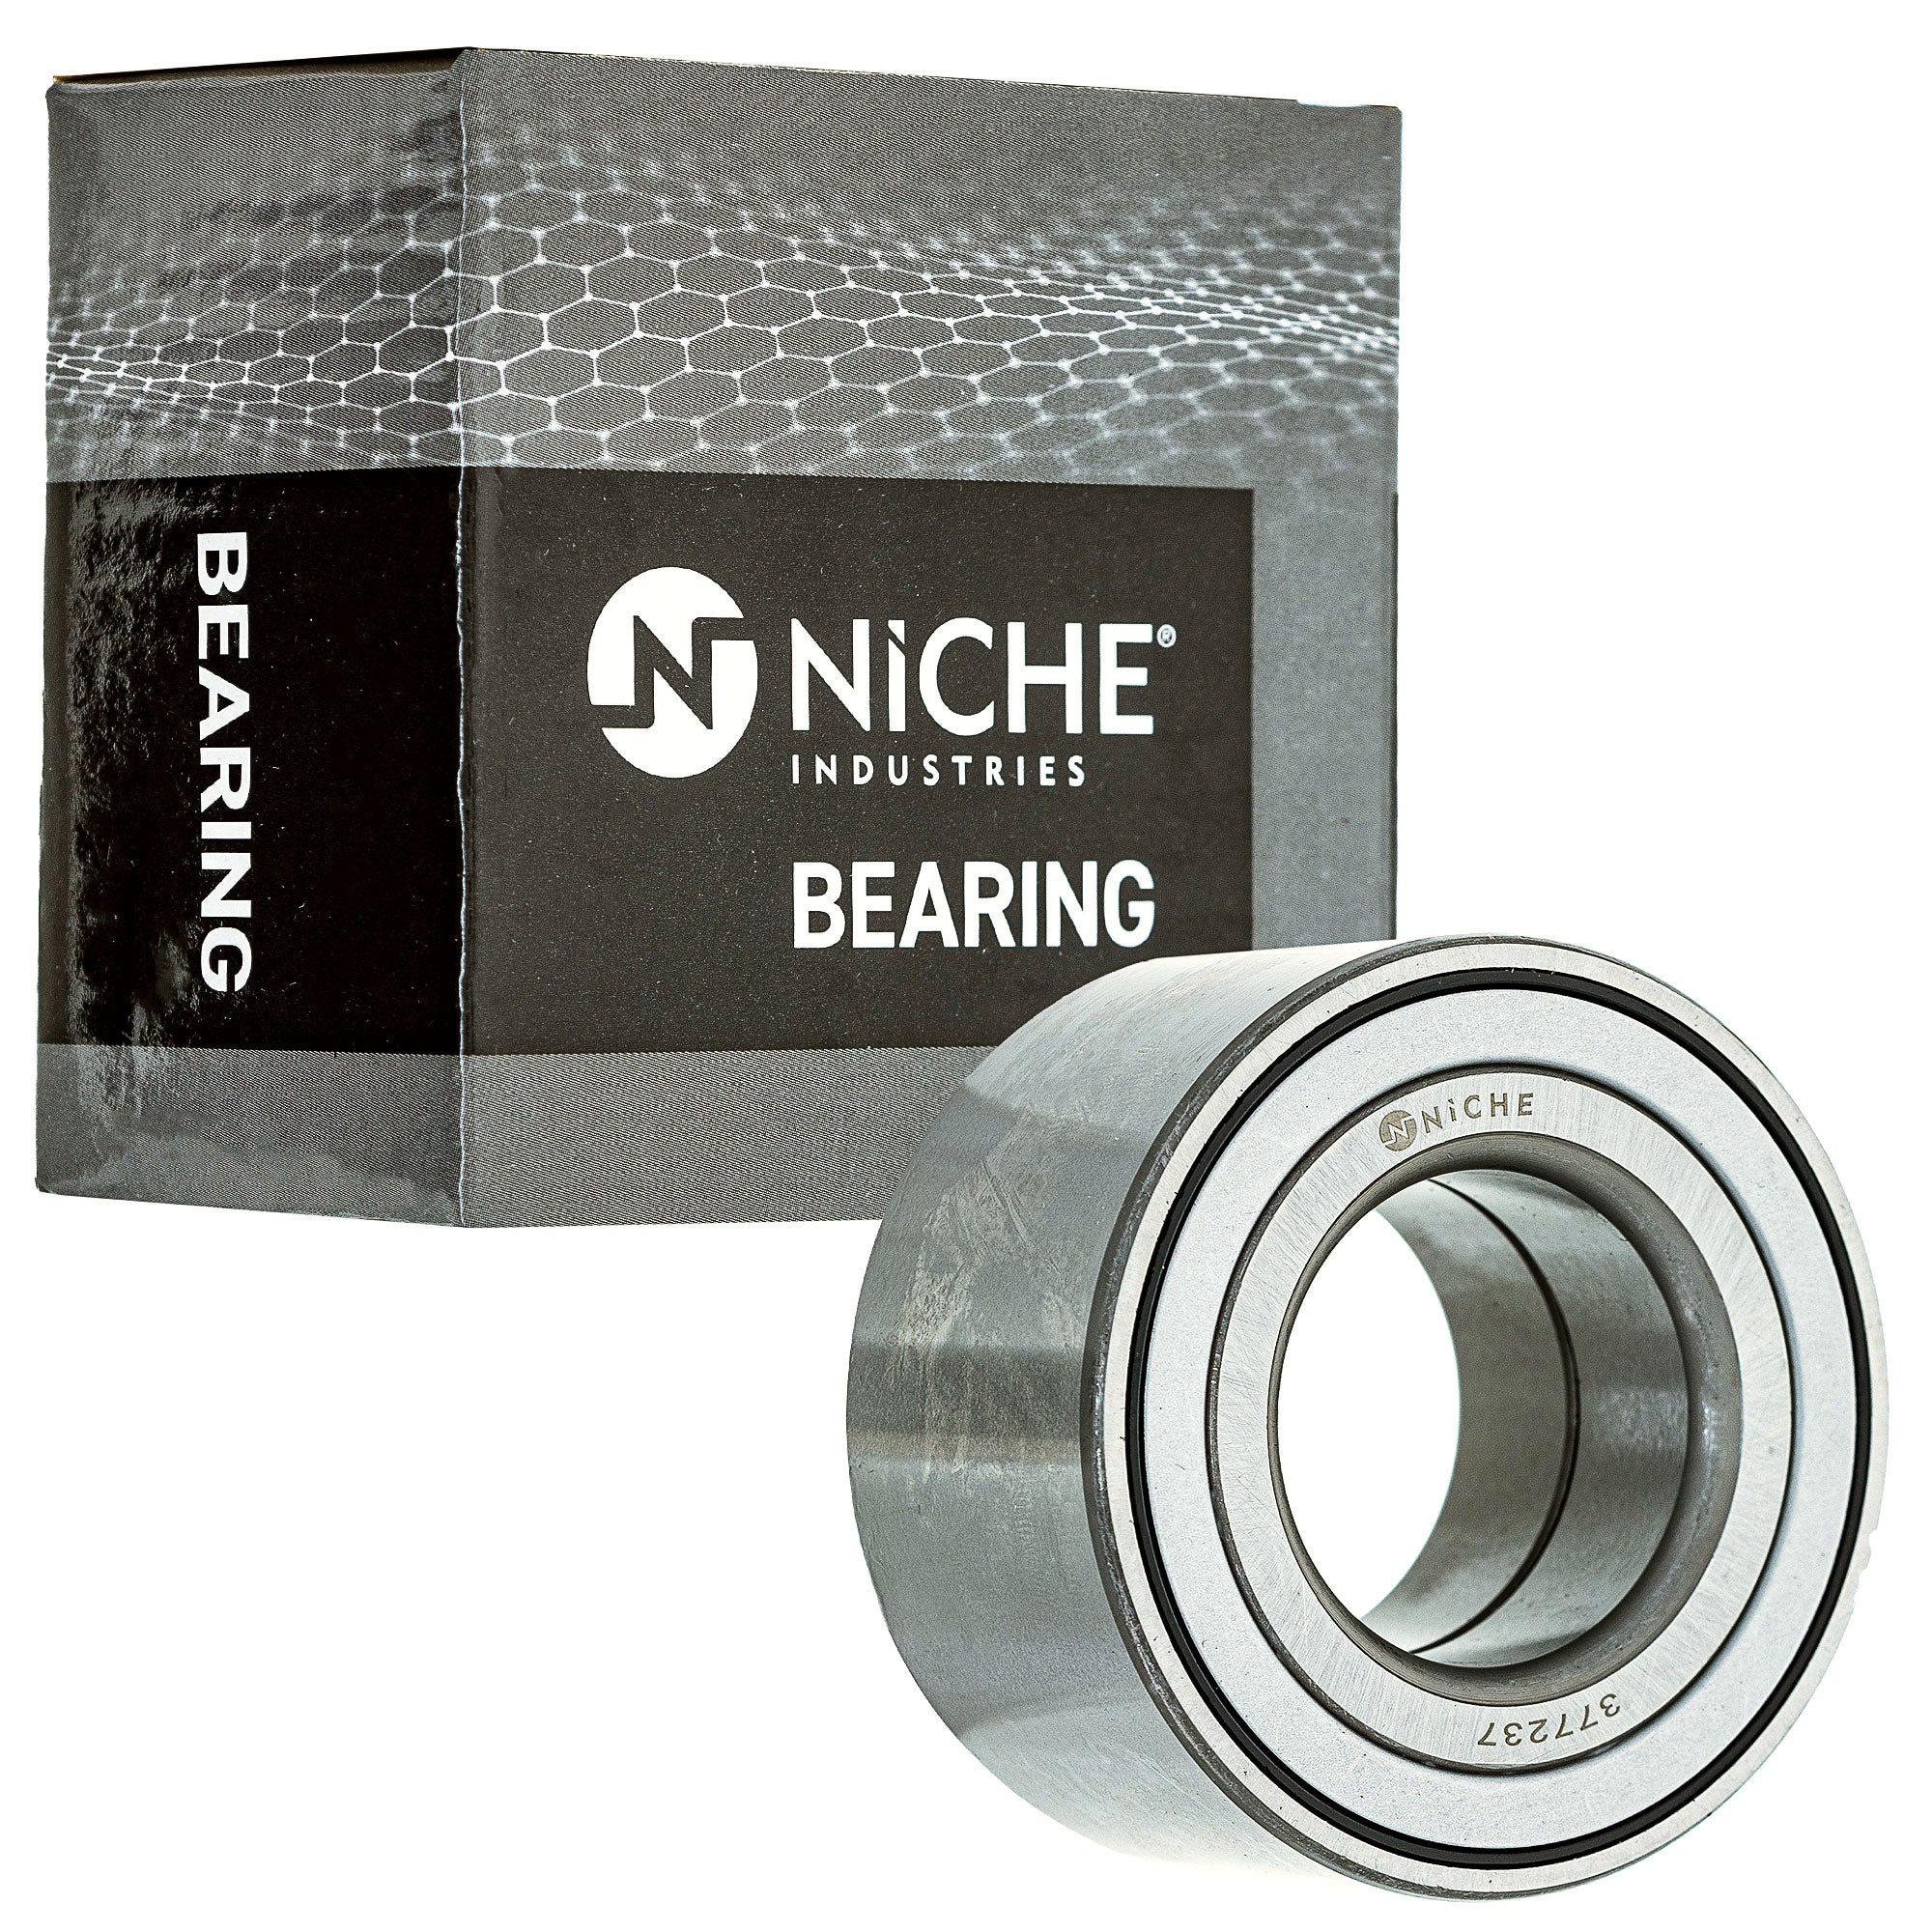 NICHE 519-CBB2326R Bearing for zOTHER Pioneer